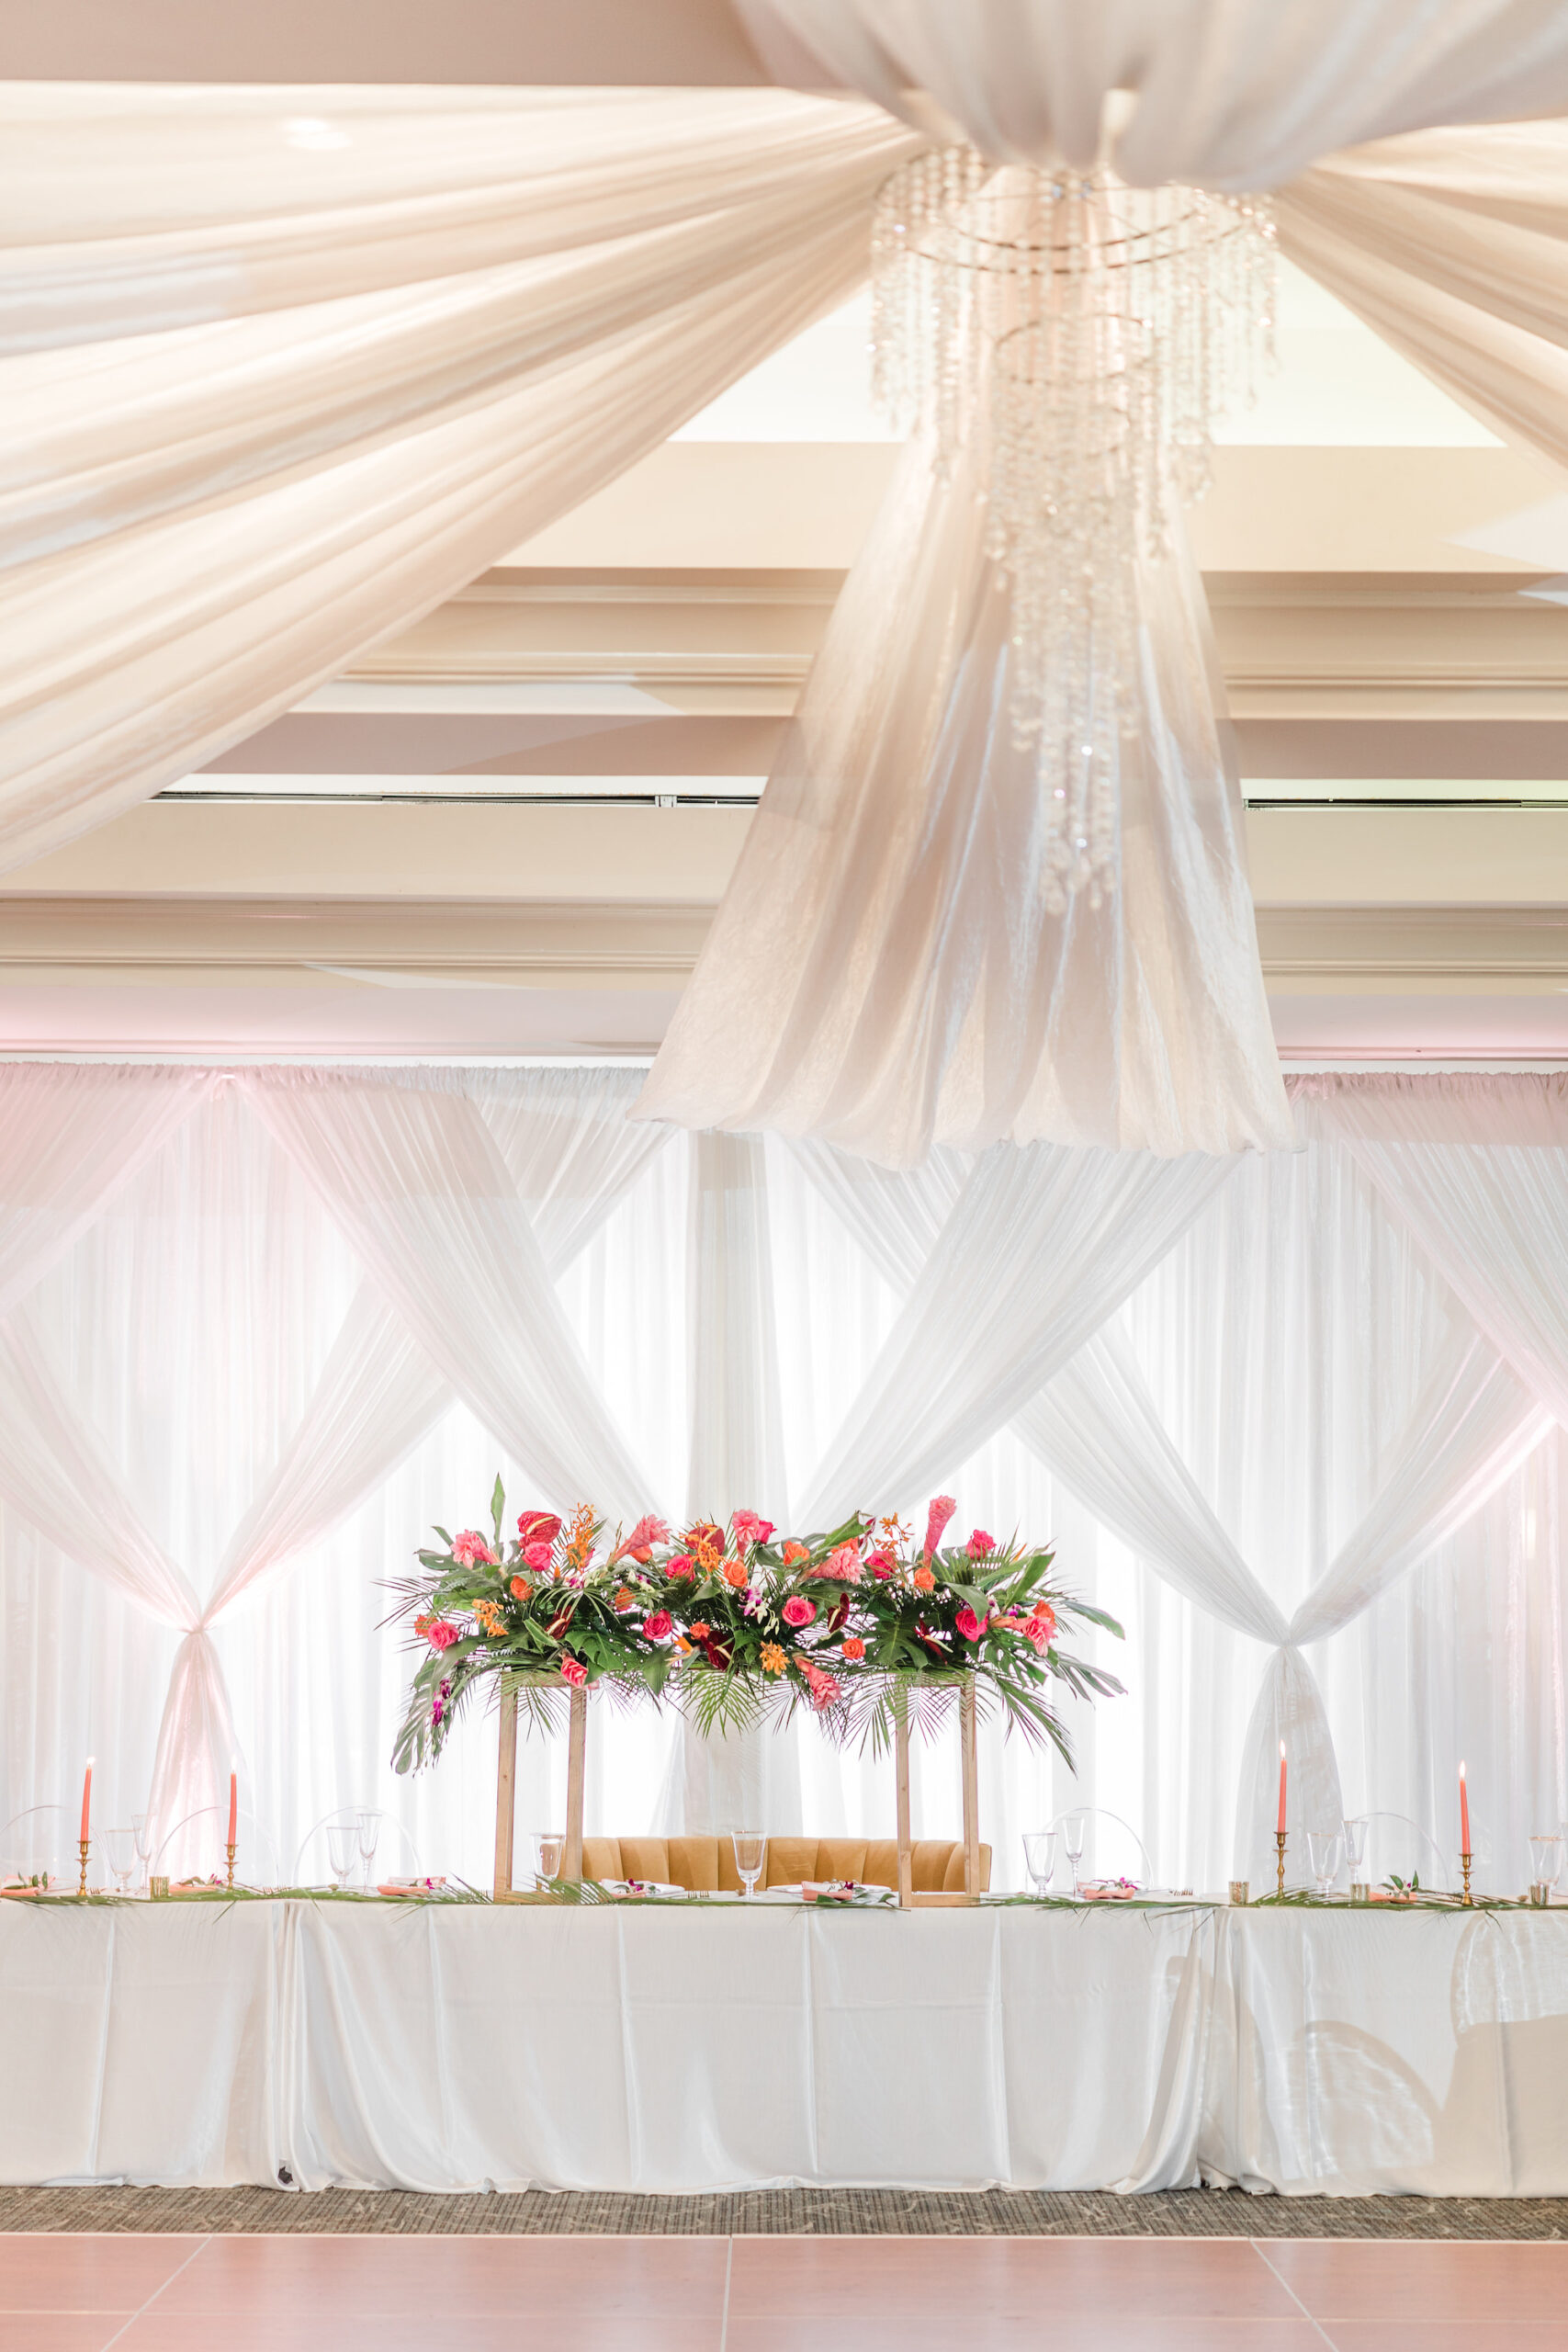 Romantic Tropical Wedding Reception with White Drapery and Crystal Chandelier | Indoor Wedding Reception Tampa Bay Golf and Country Club | Florist Save the Date Florida